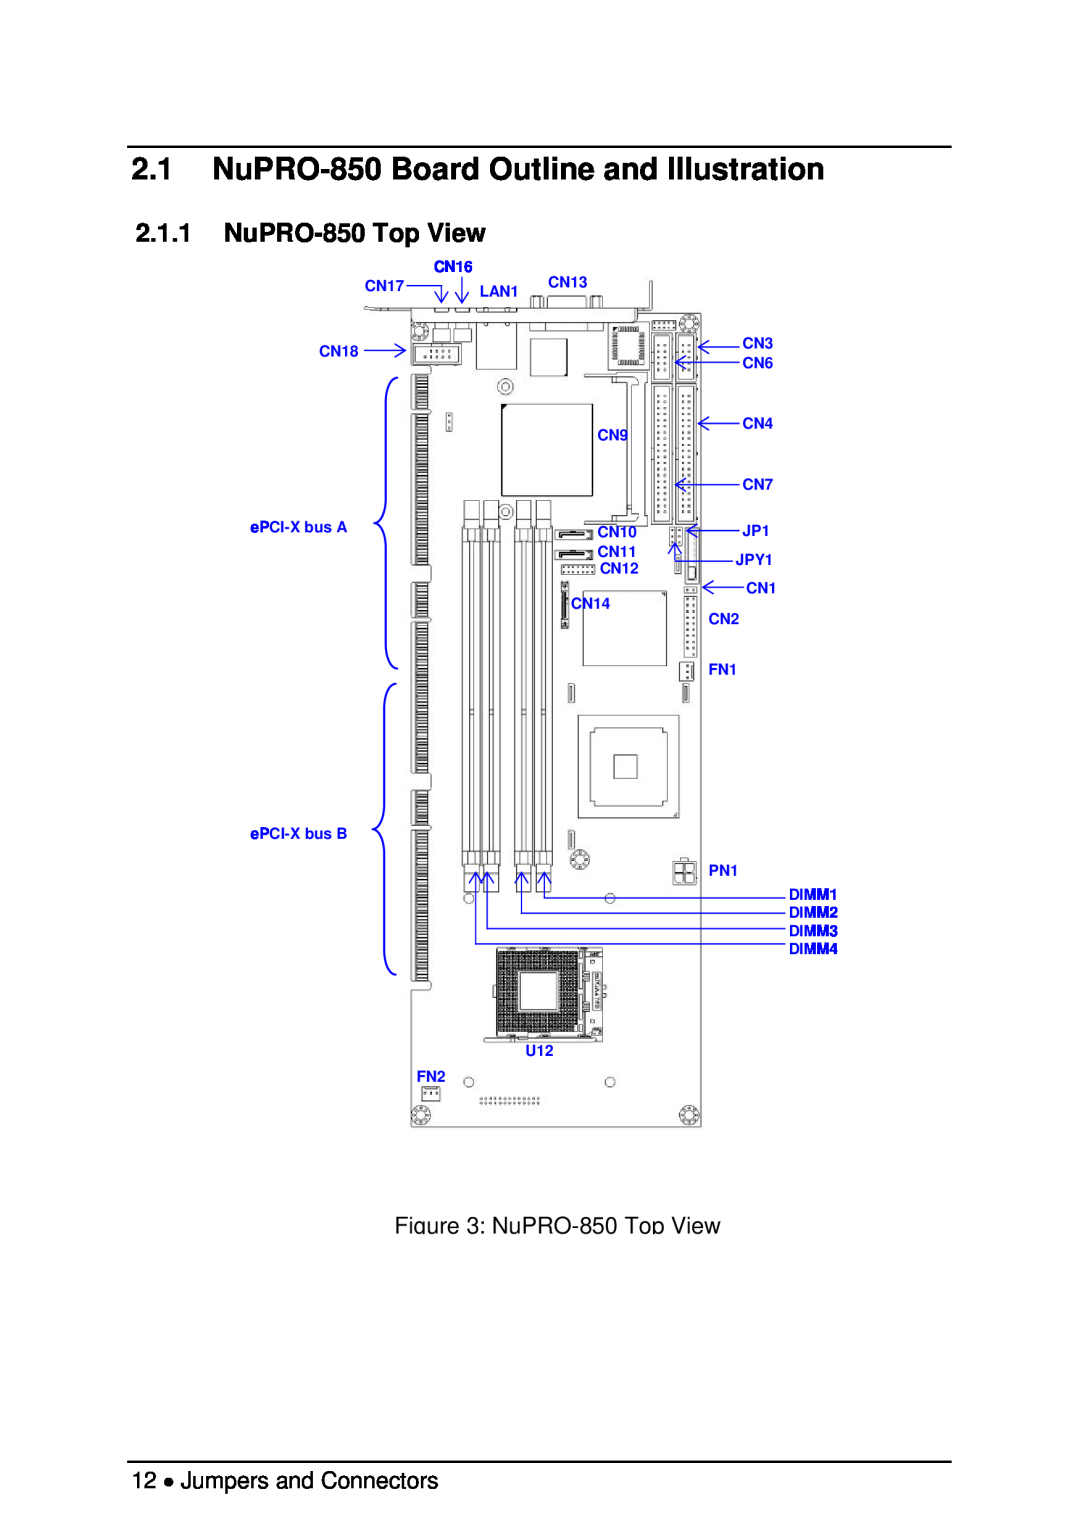 Intel user manual NuPRO-850 Board Outline and Illustration, NuPRO-850 Top View 